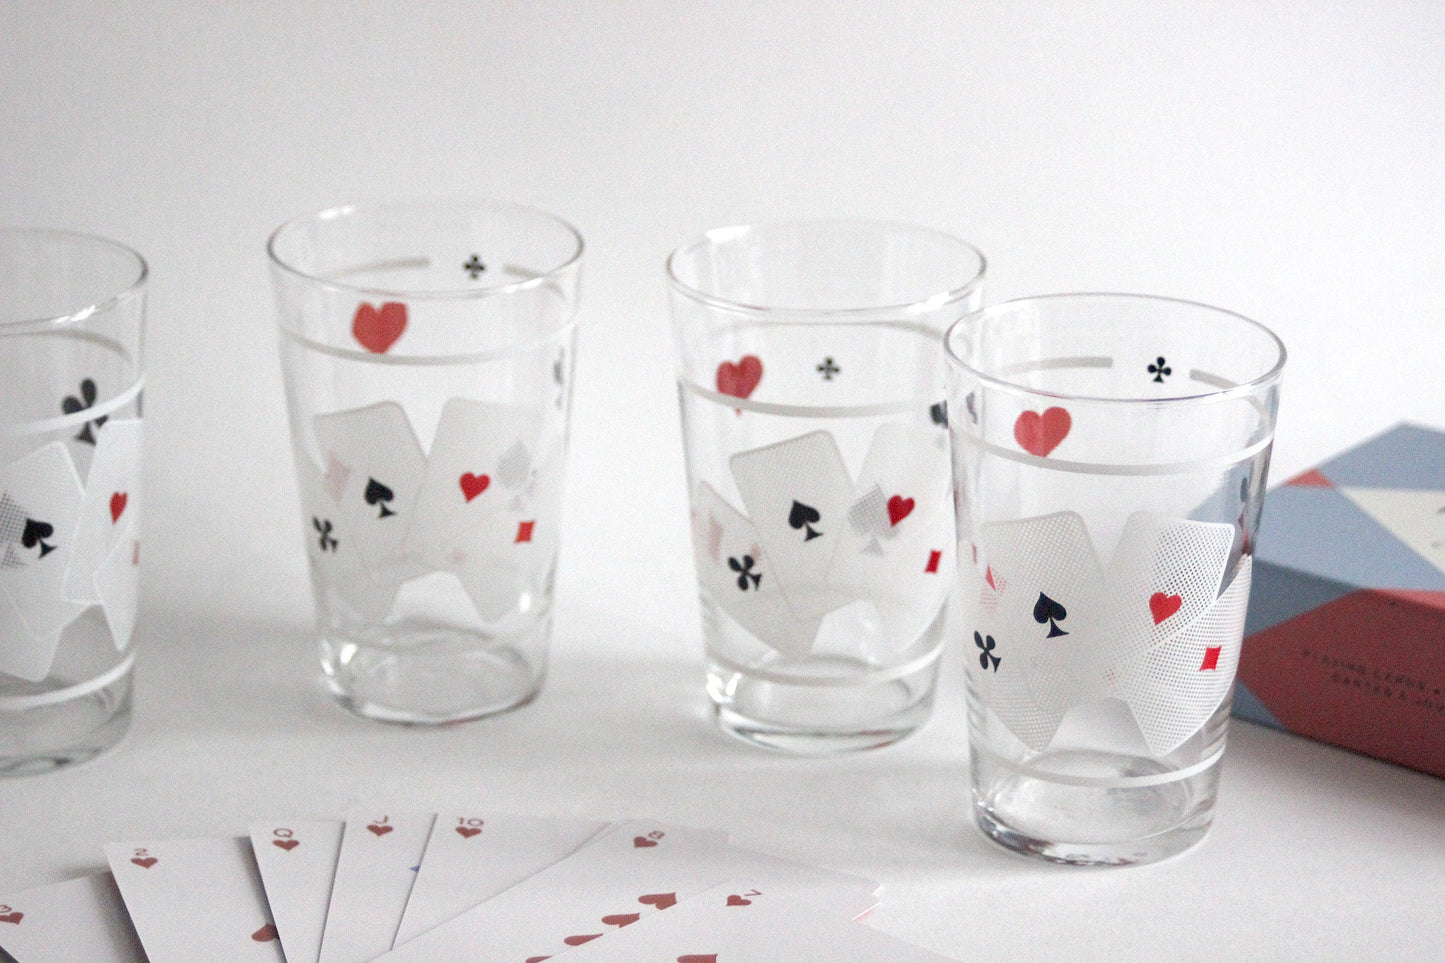 Vintage glass set of 6 drinking glasses with Poker cards motive. Handmade, 60s. Mid-Century Style.